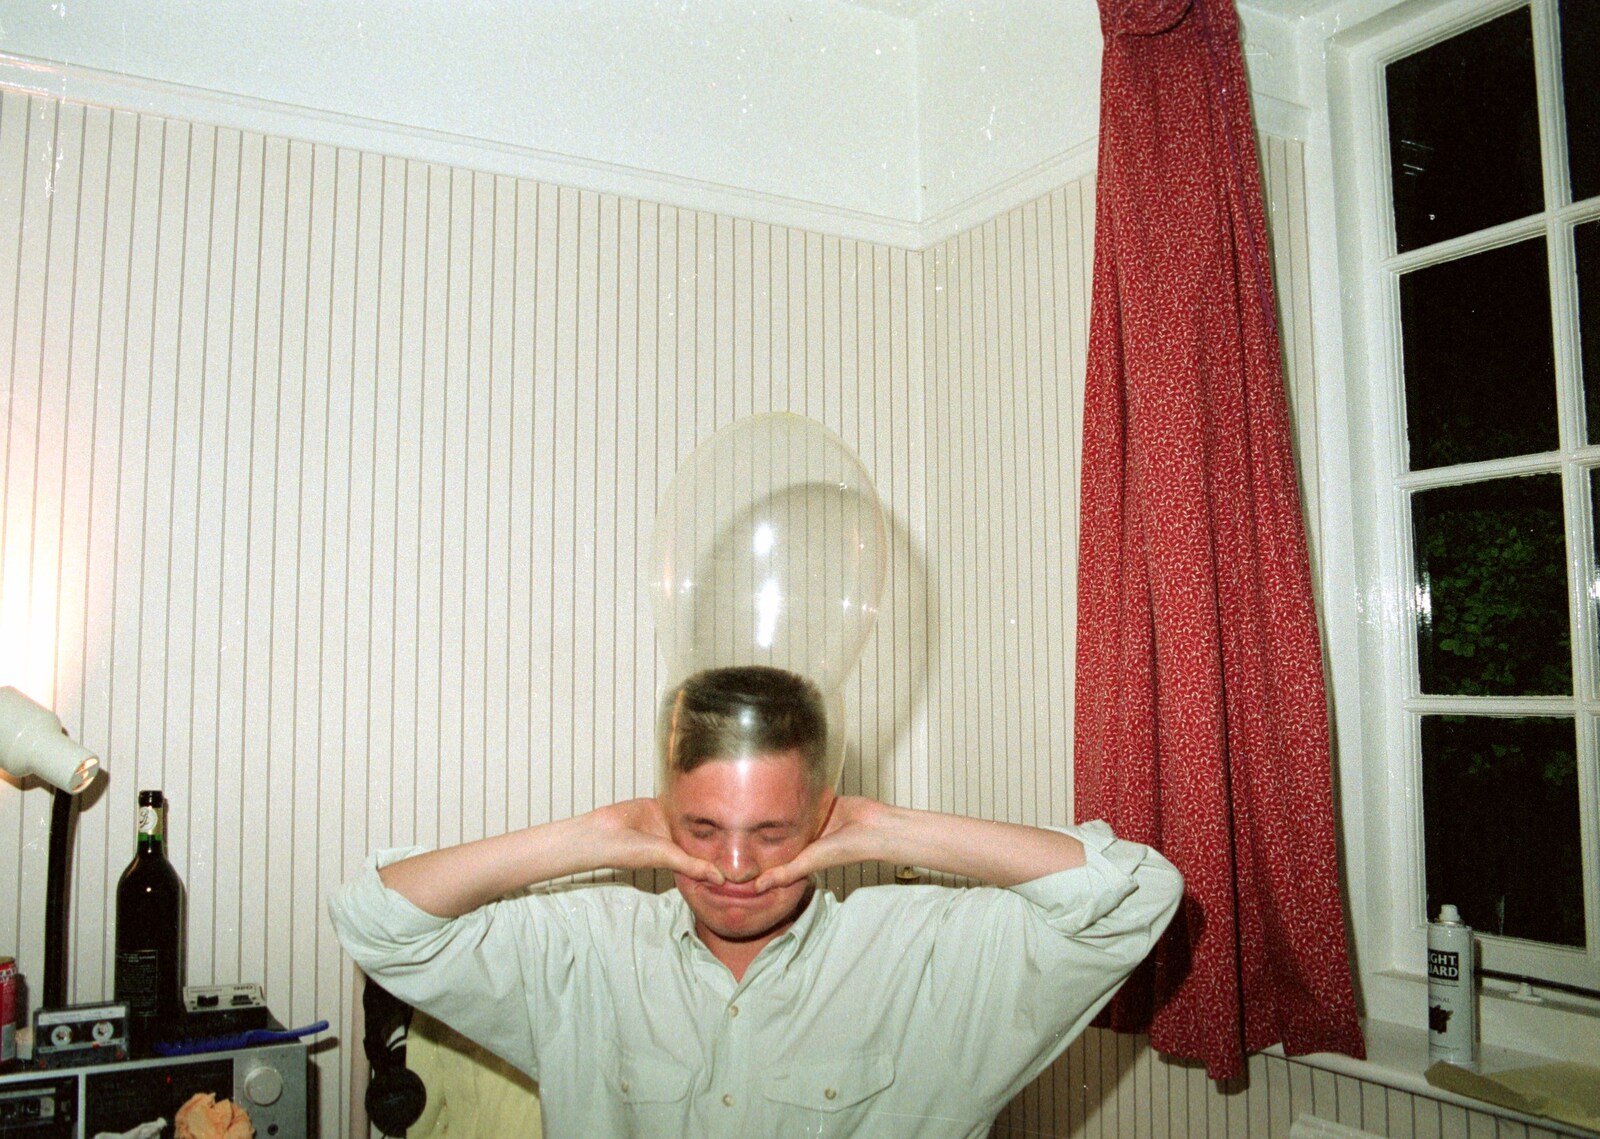 Nosher sticks a condom on his head from Somans: Nosher's 21st Birthday at the Soman-Wherry Press, Norwich, Norfolk - 26th May 1988